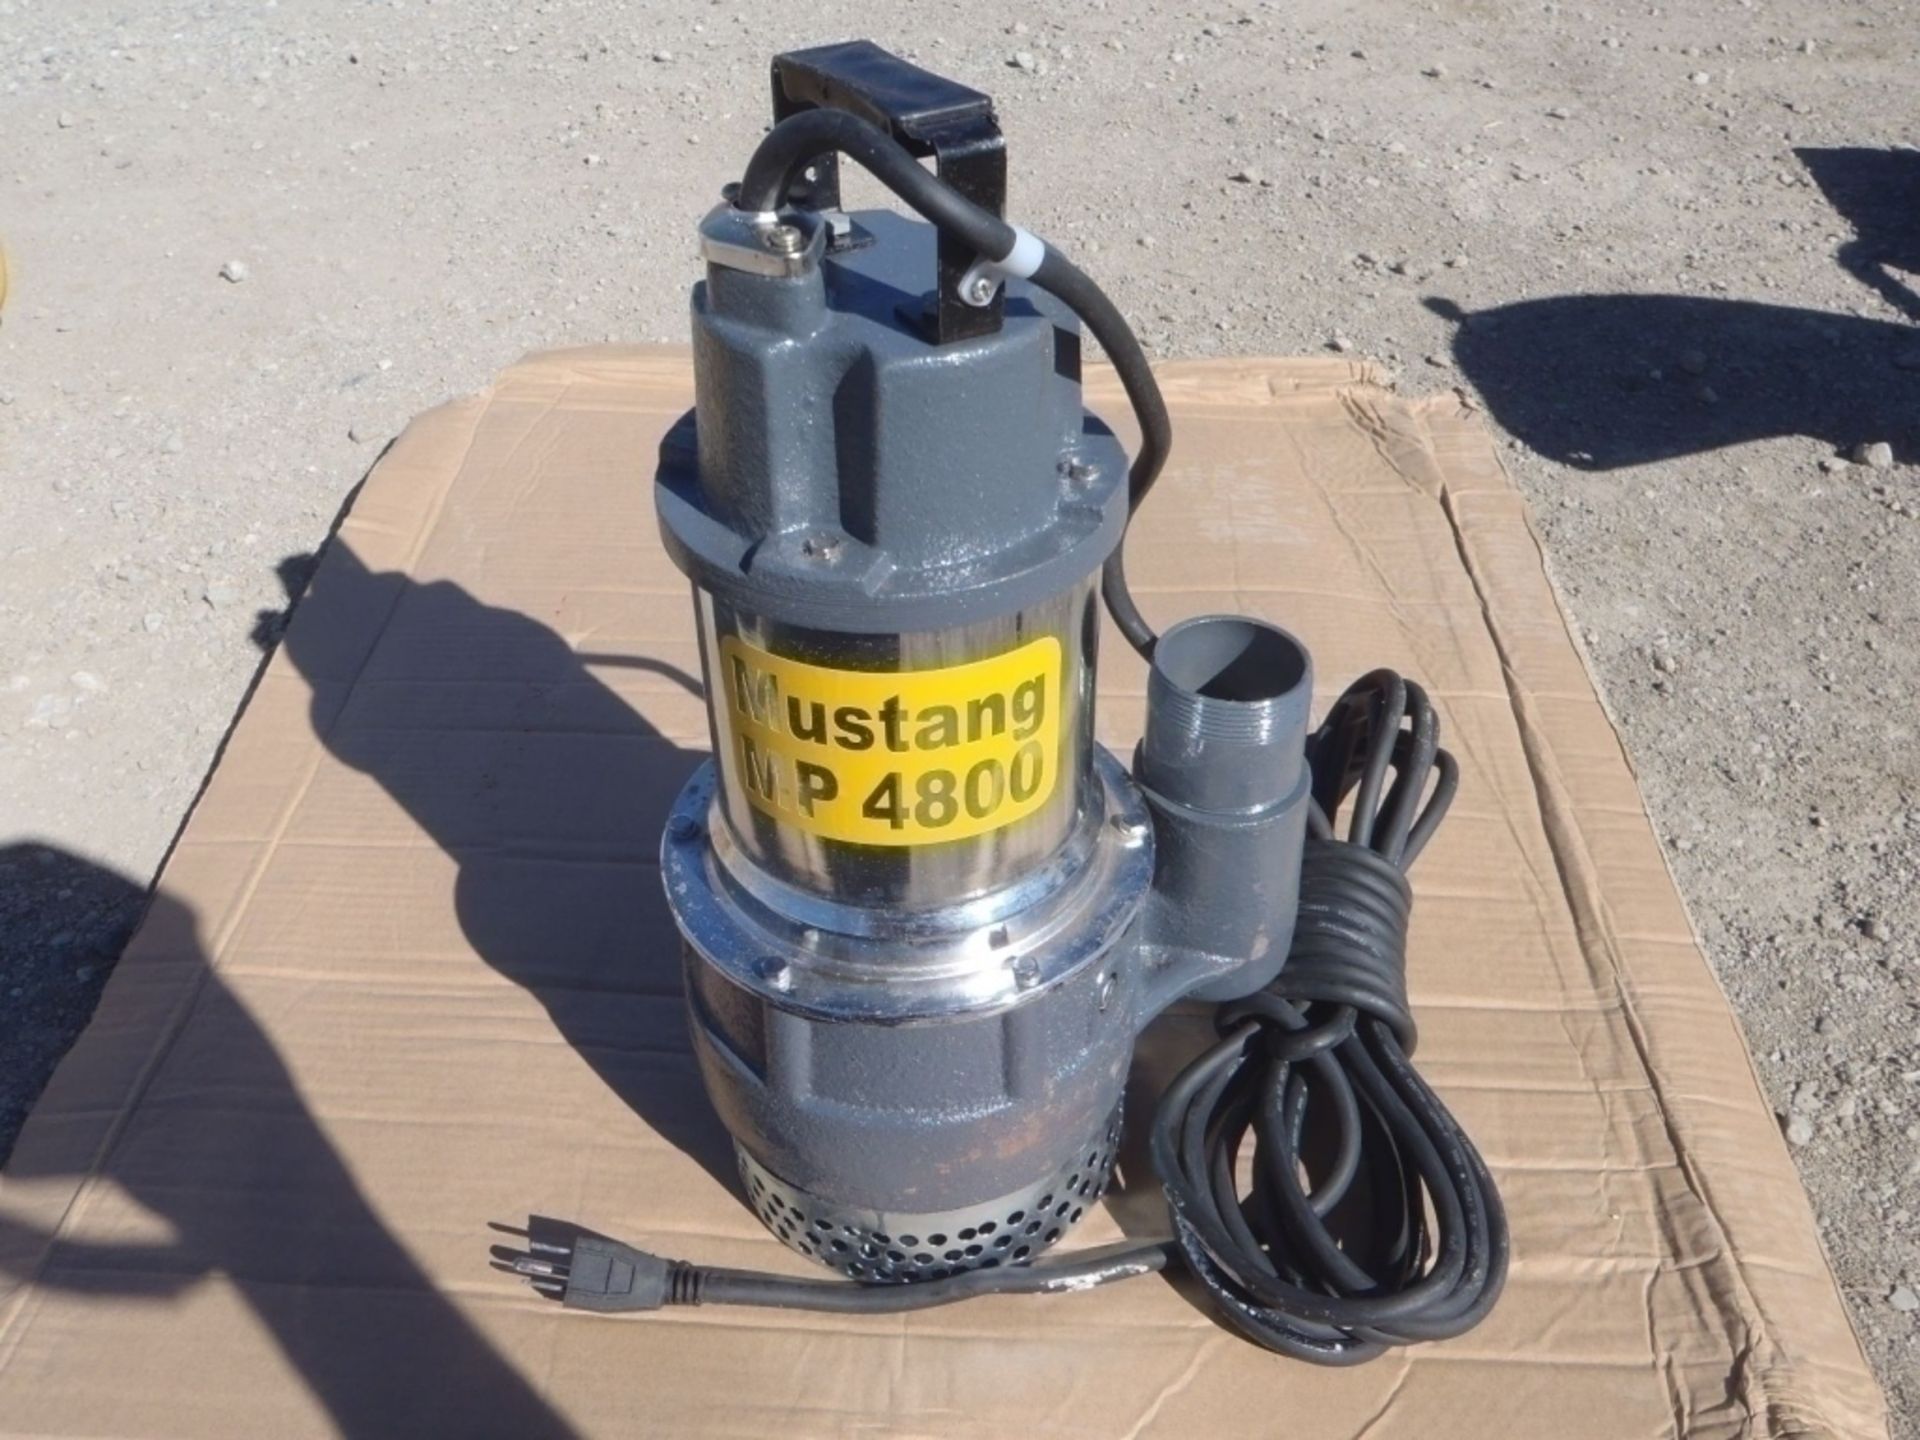 Unused Mustang MP4800 2" Submersible Pump, Electric - Image 4 of 4